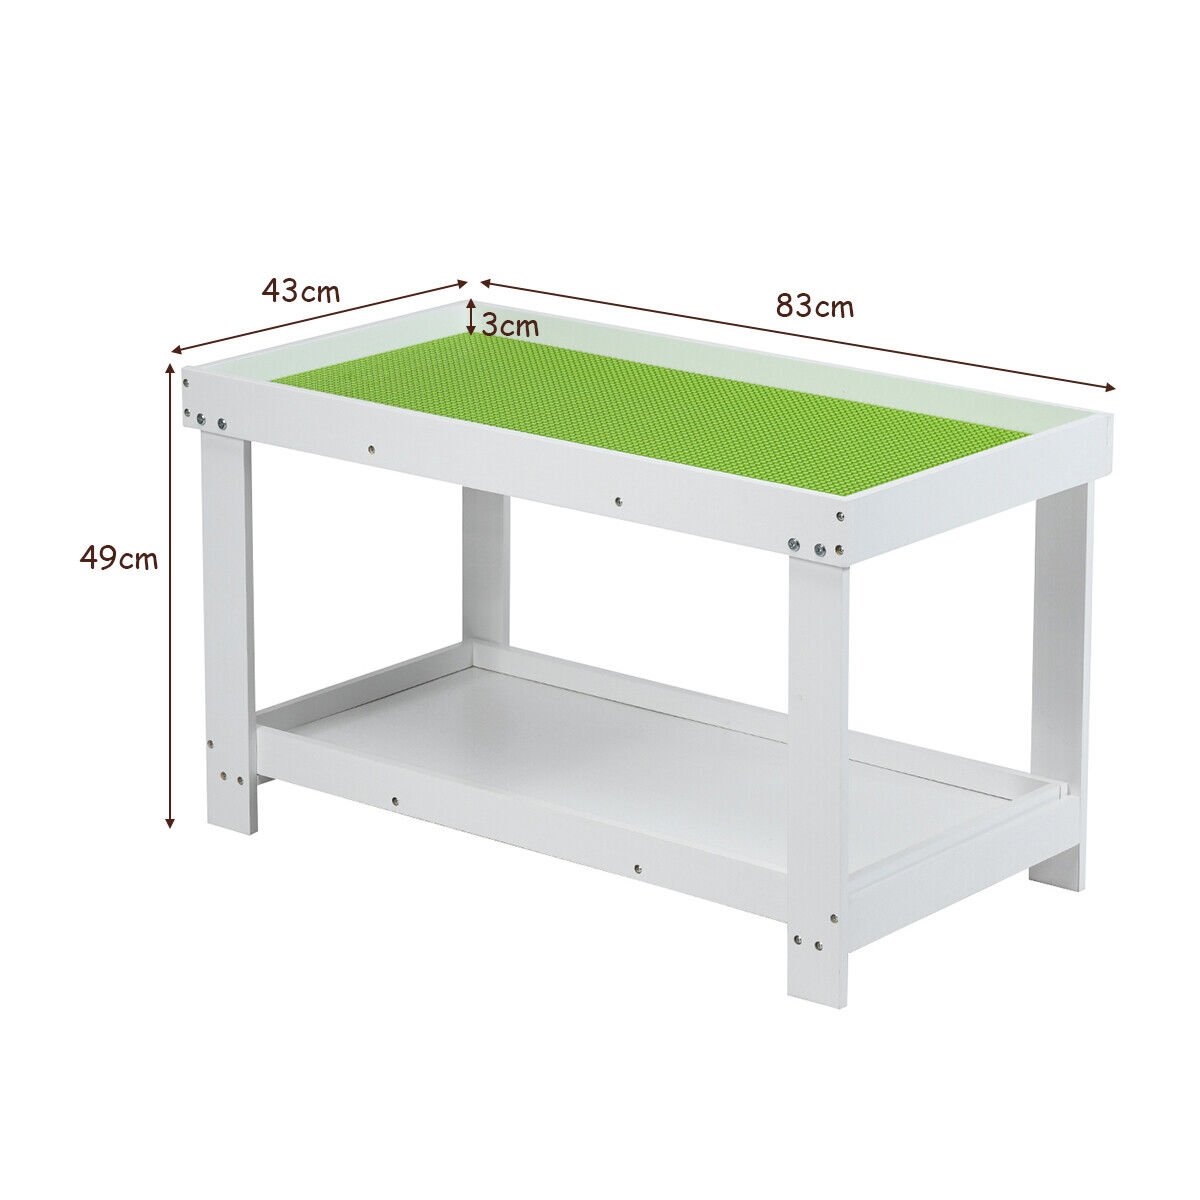 Organize Play: White Wooden Kids Activity Table with Storage Shelf